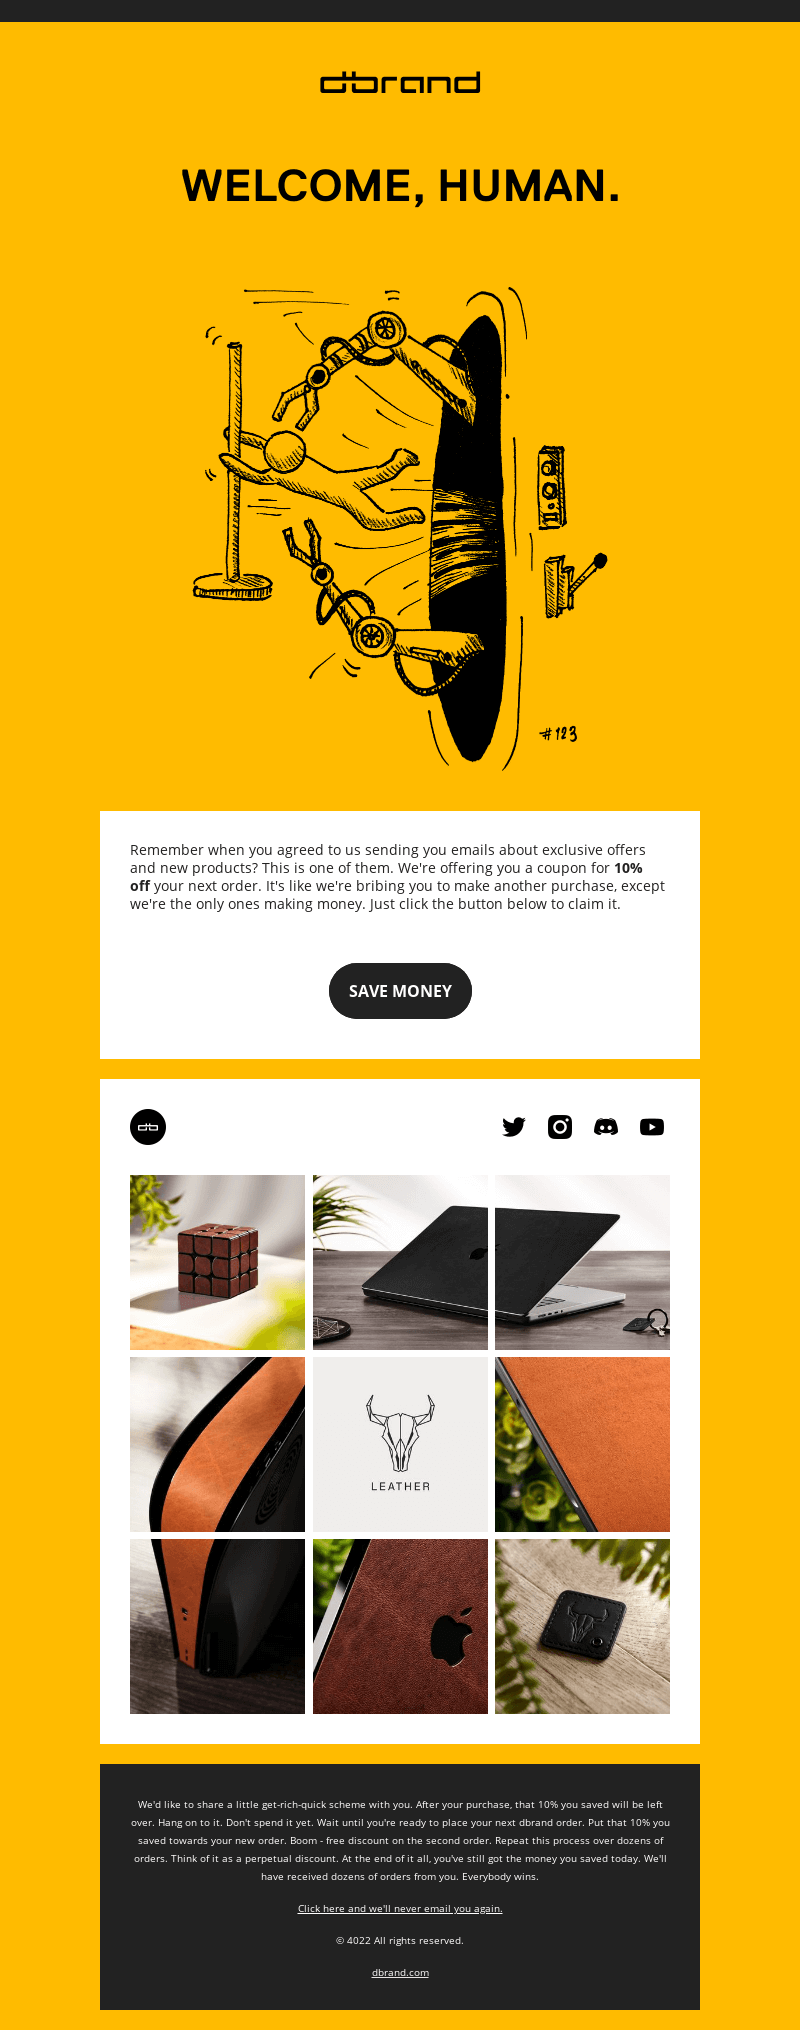 dbrand email